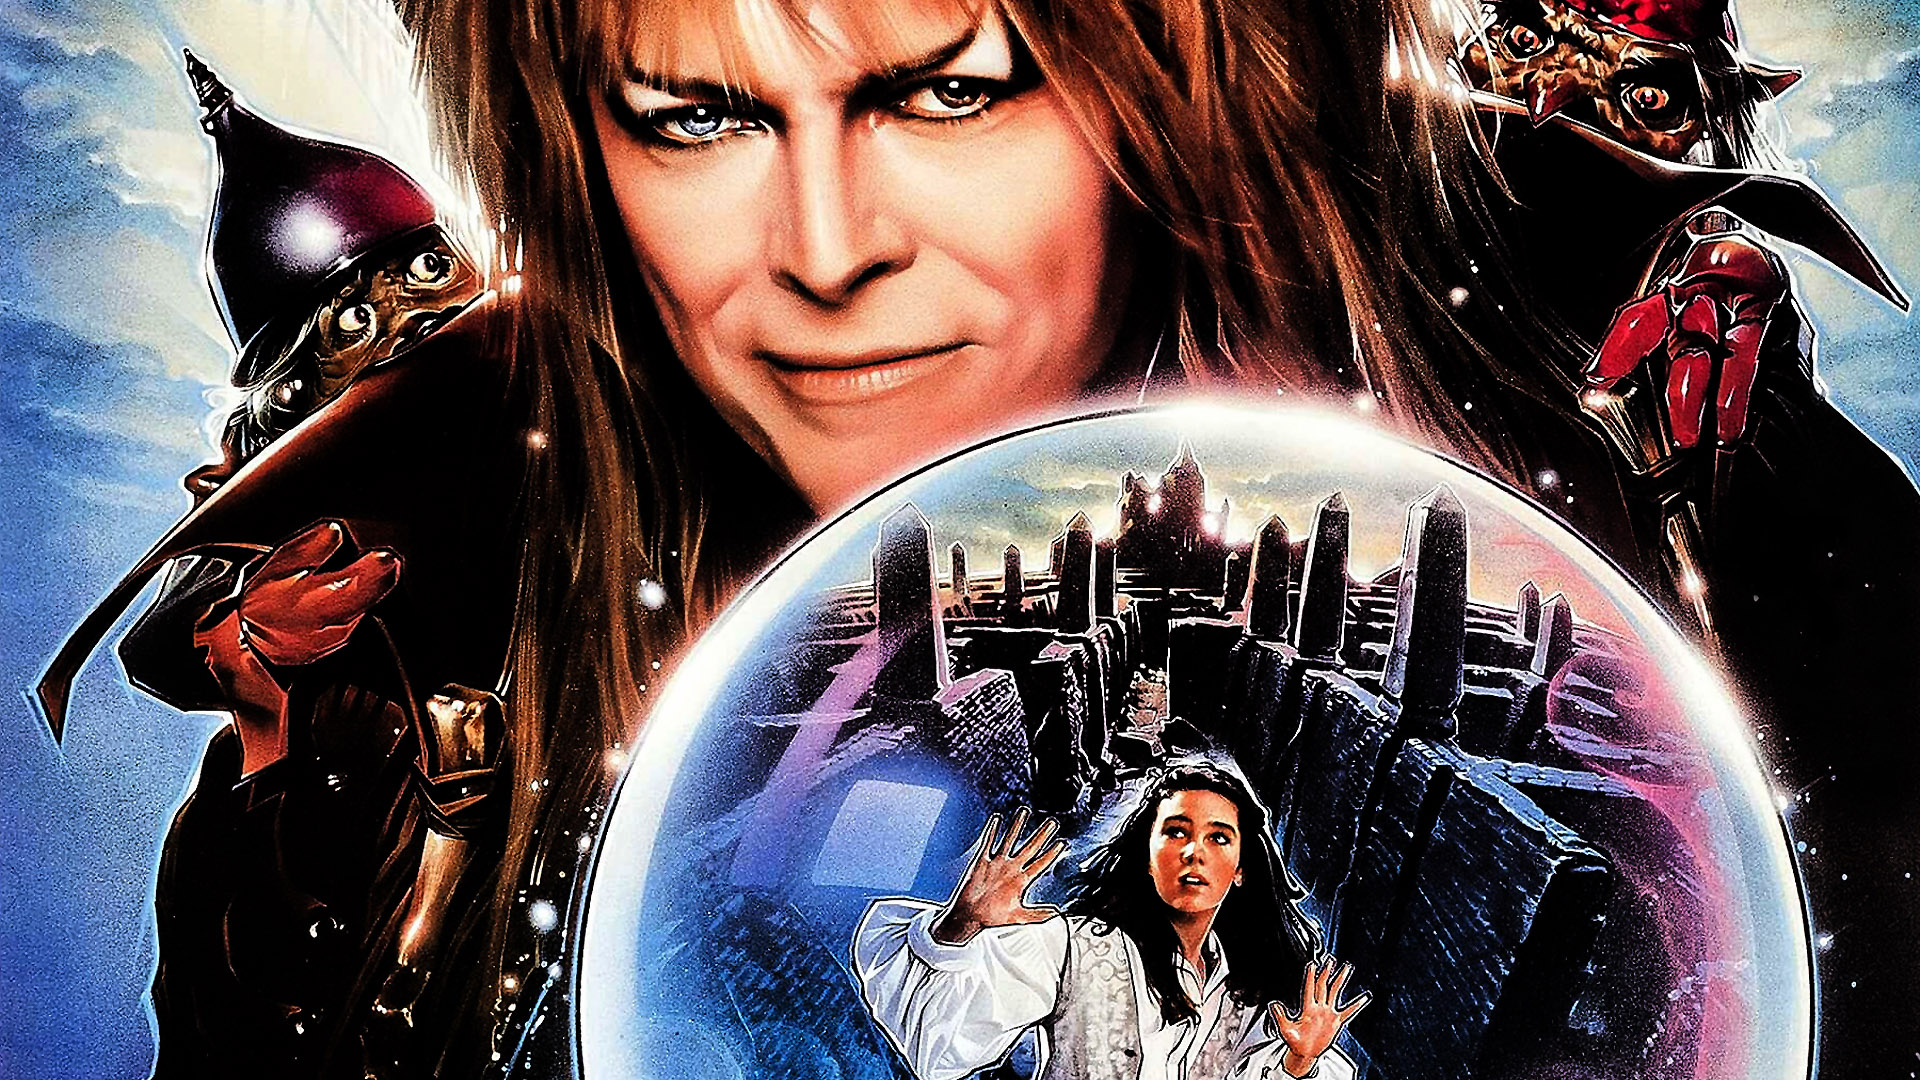 Movie Labyrinth HD Wallpaper | Background Image